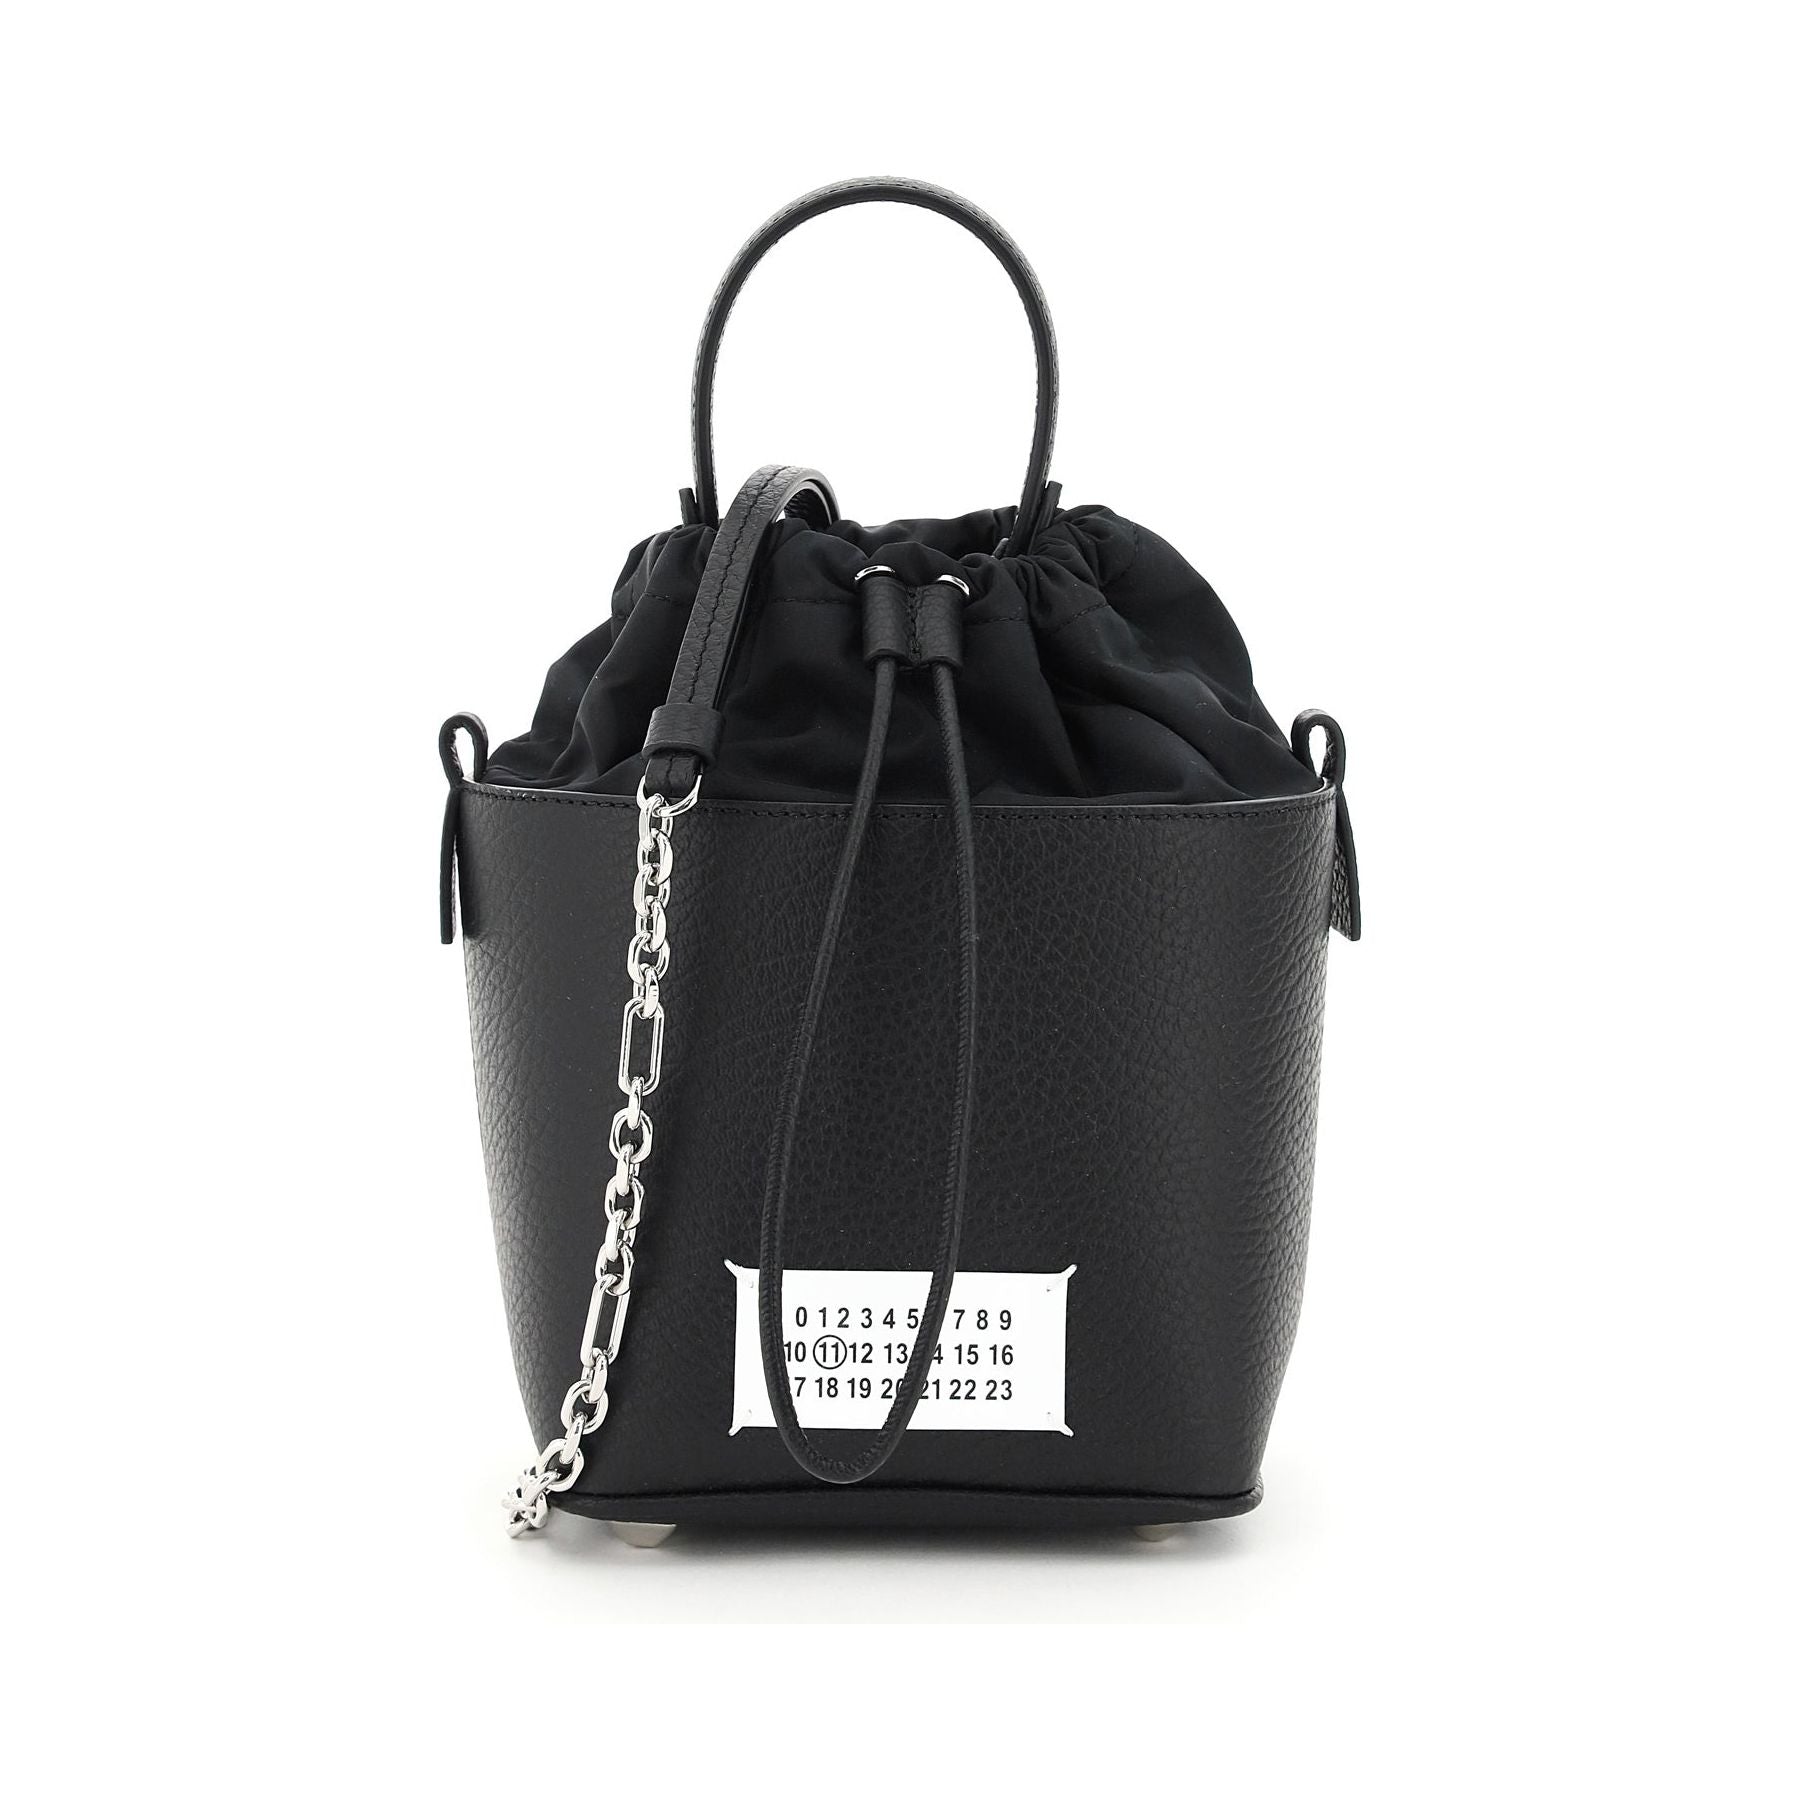 5AC Small Leather Bucket Bag